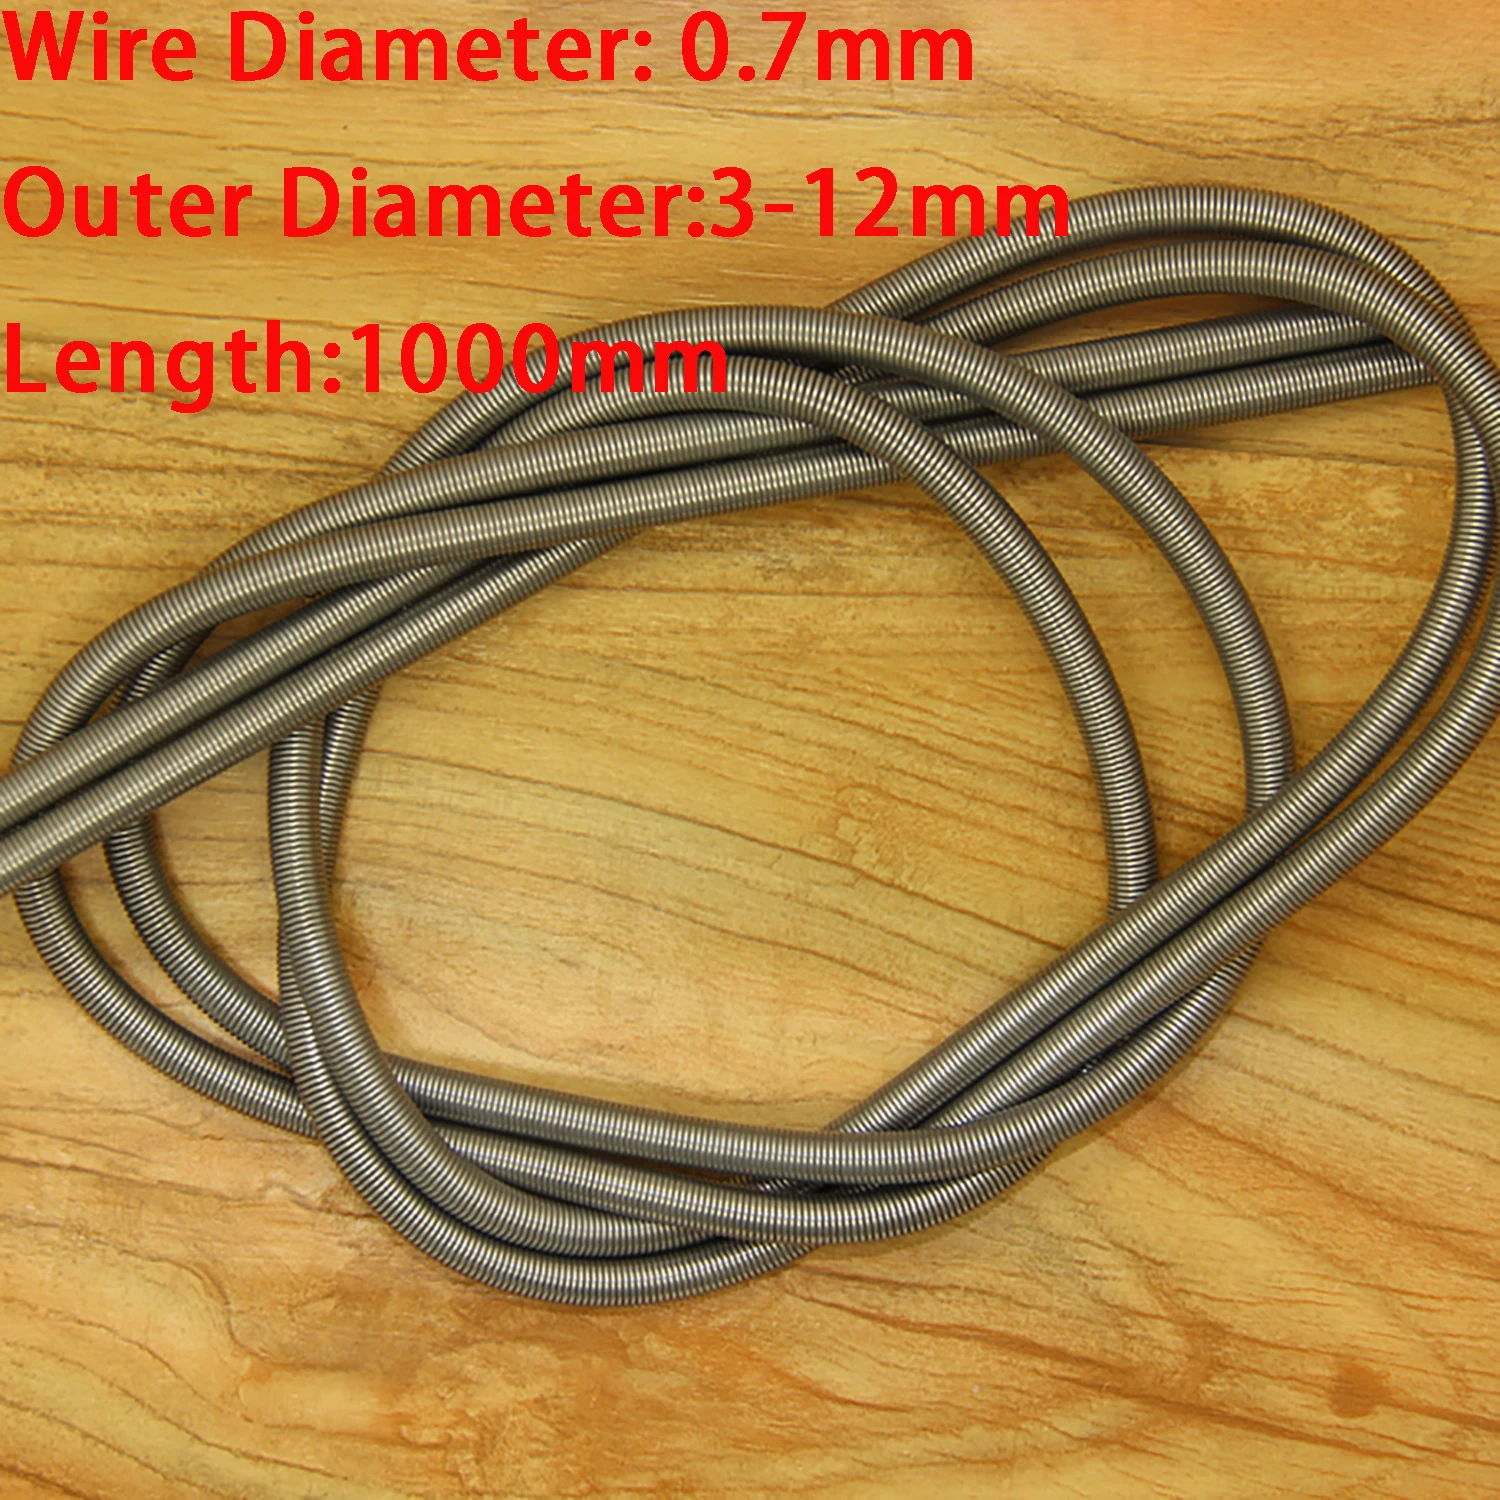 

Custom Thin Long Flexible Extension Compression Spring, 1 Meter, 0.7mm Wire Diameter * Out Diameter 3-12mm * 1000mm Length, 2PCs